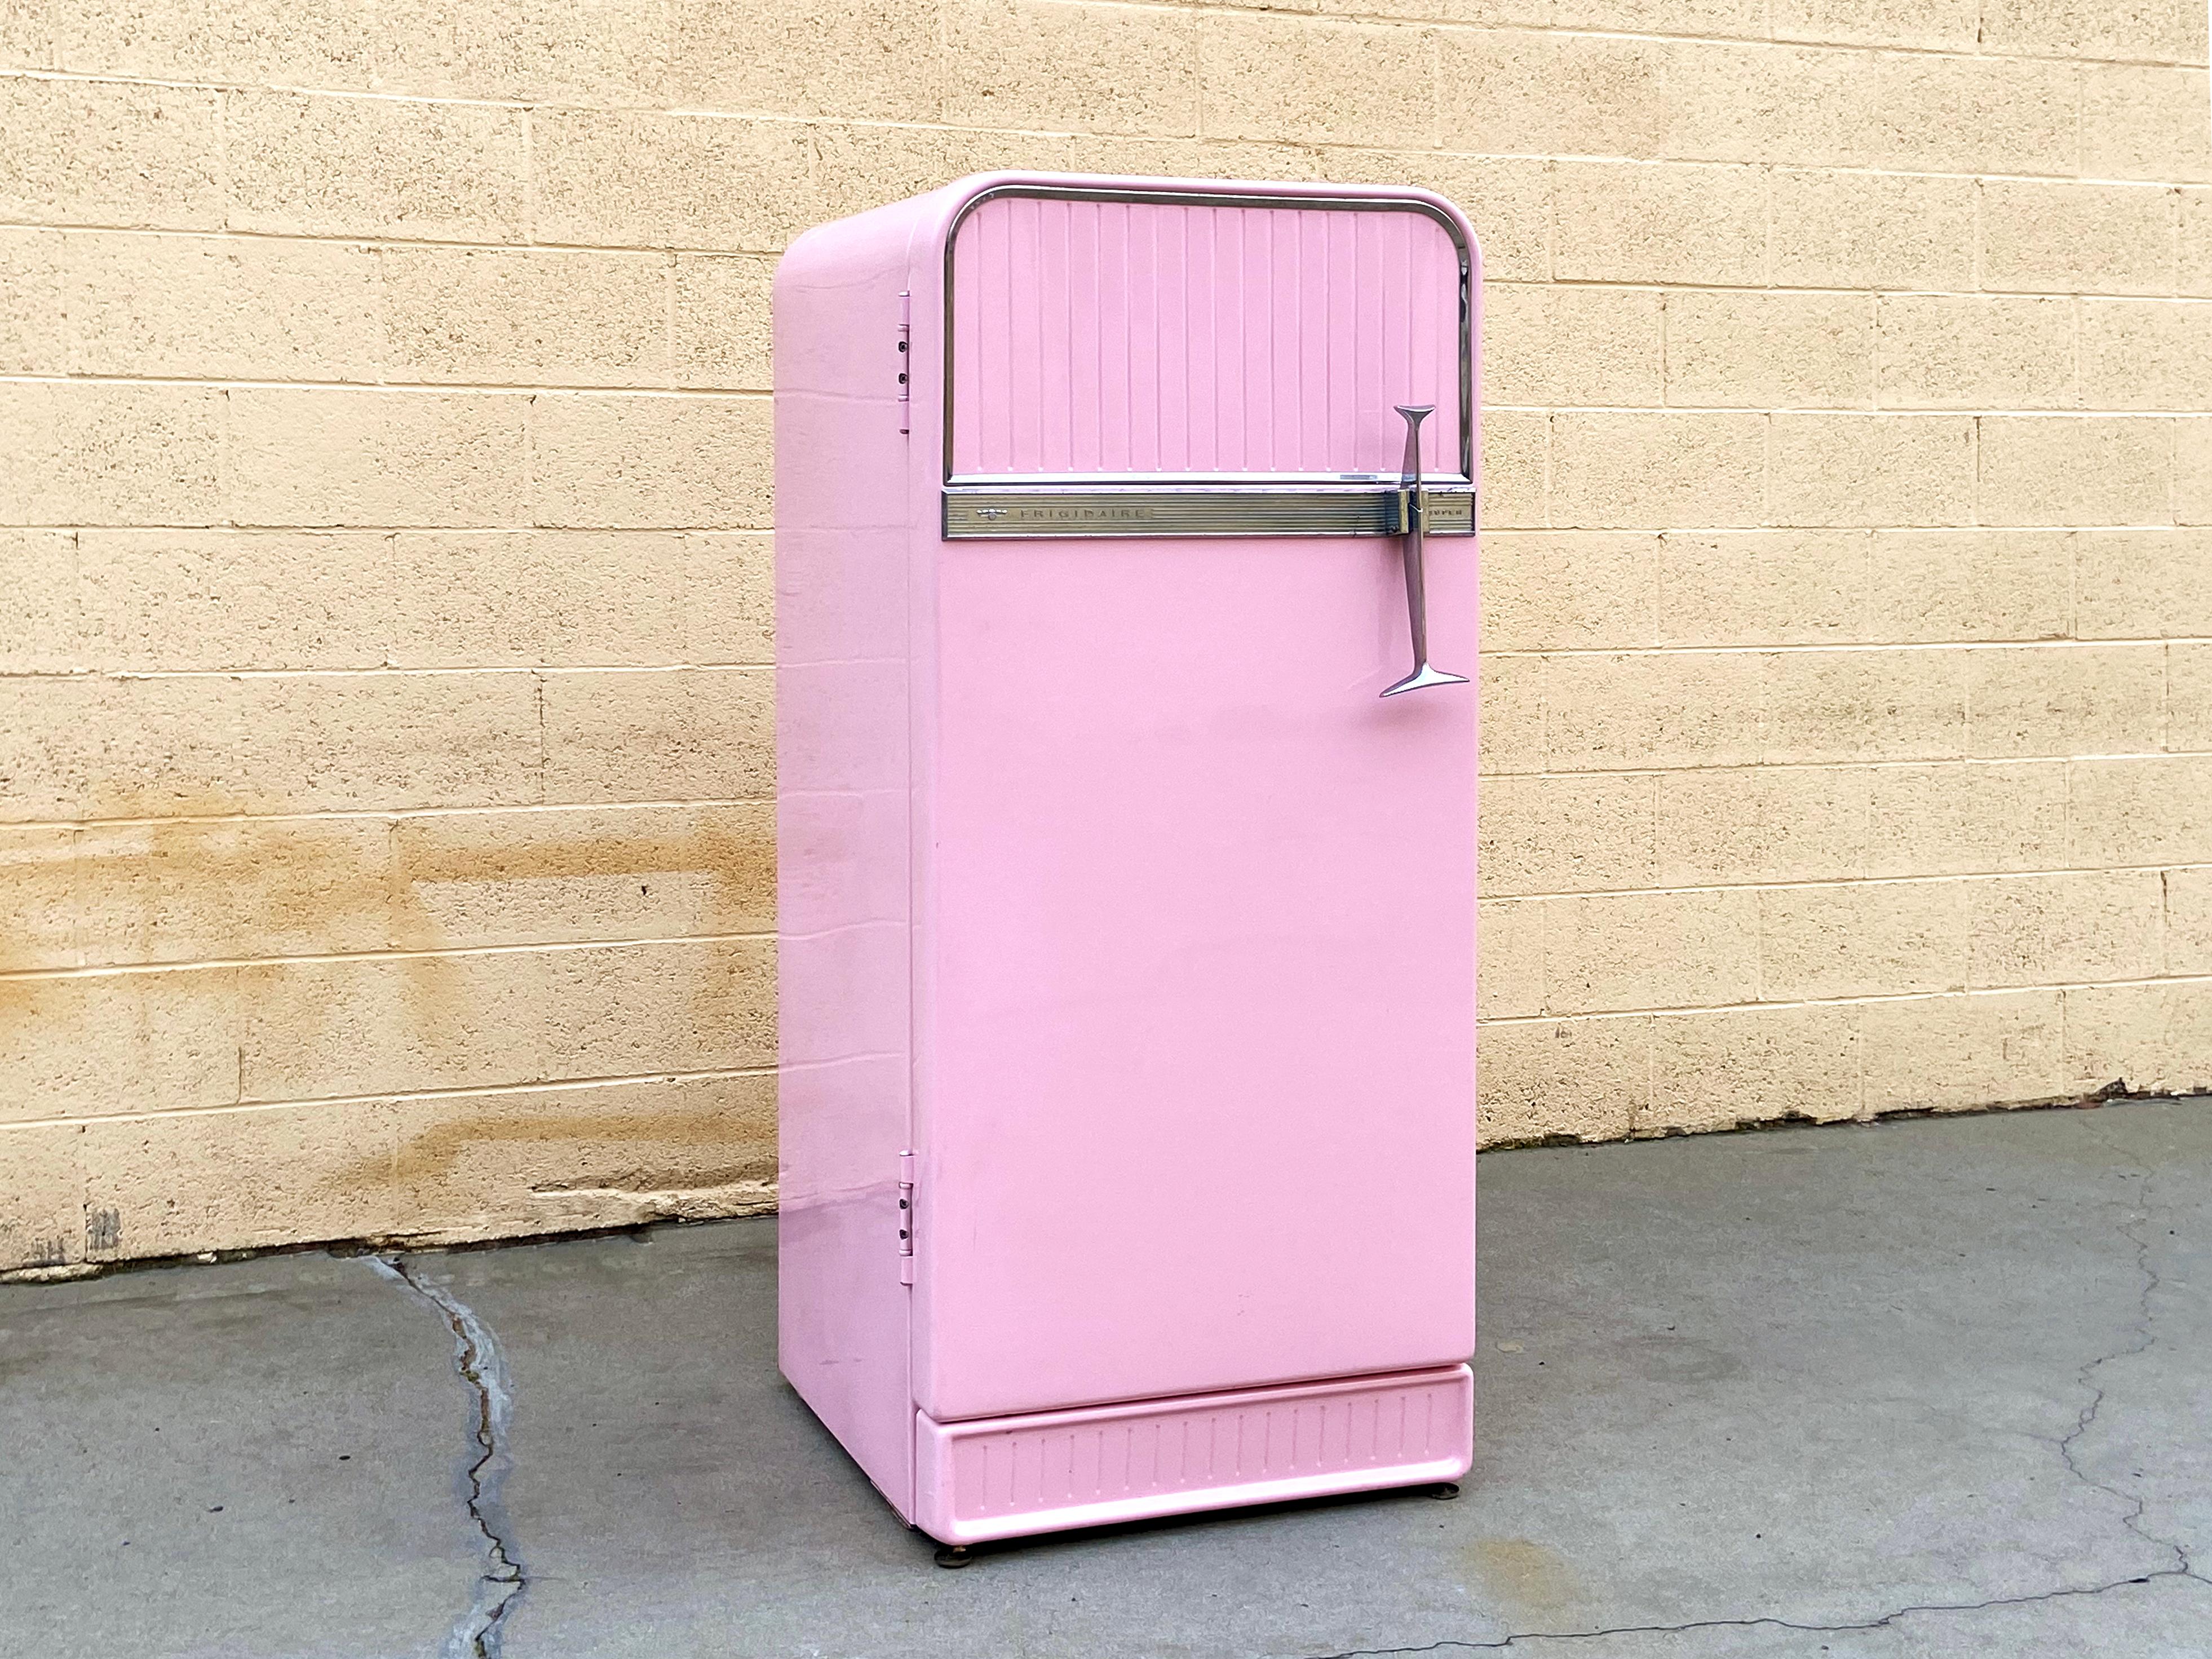 This 1950s Fridgedaire refrigerator looks like a dream! It functions too- seals tight and stays cool. In original condition with only minimal wear to paint. Some pitting can be seen on aluminum trim and interior plastic shows a bit of wear around